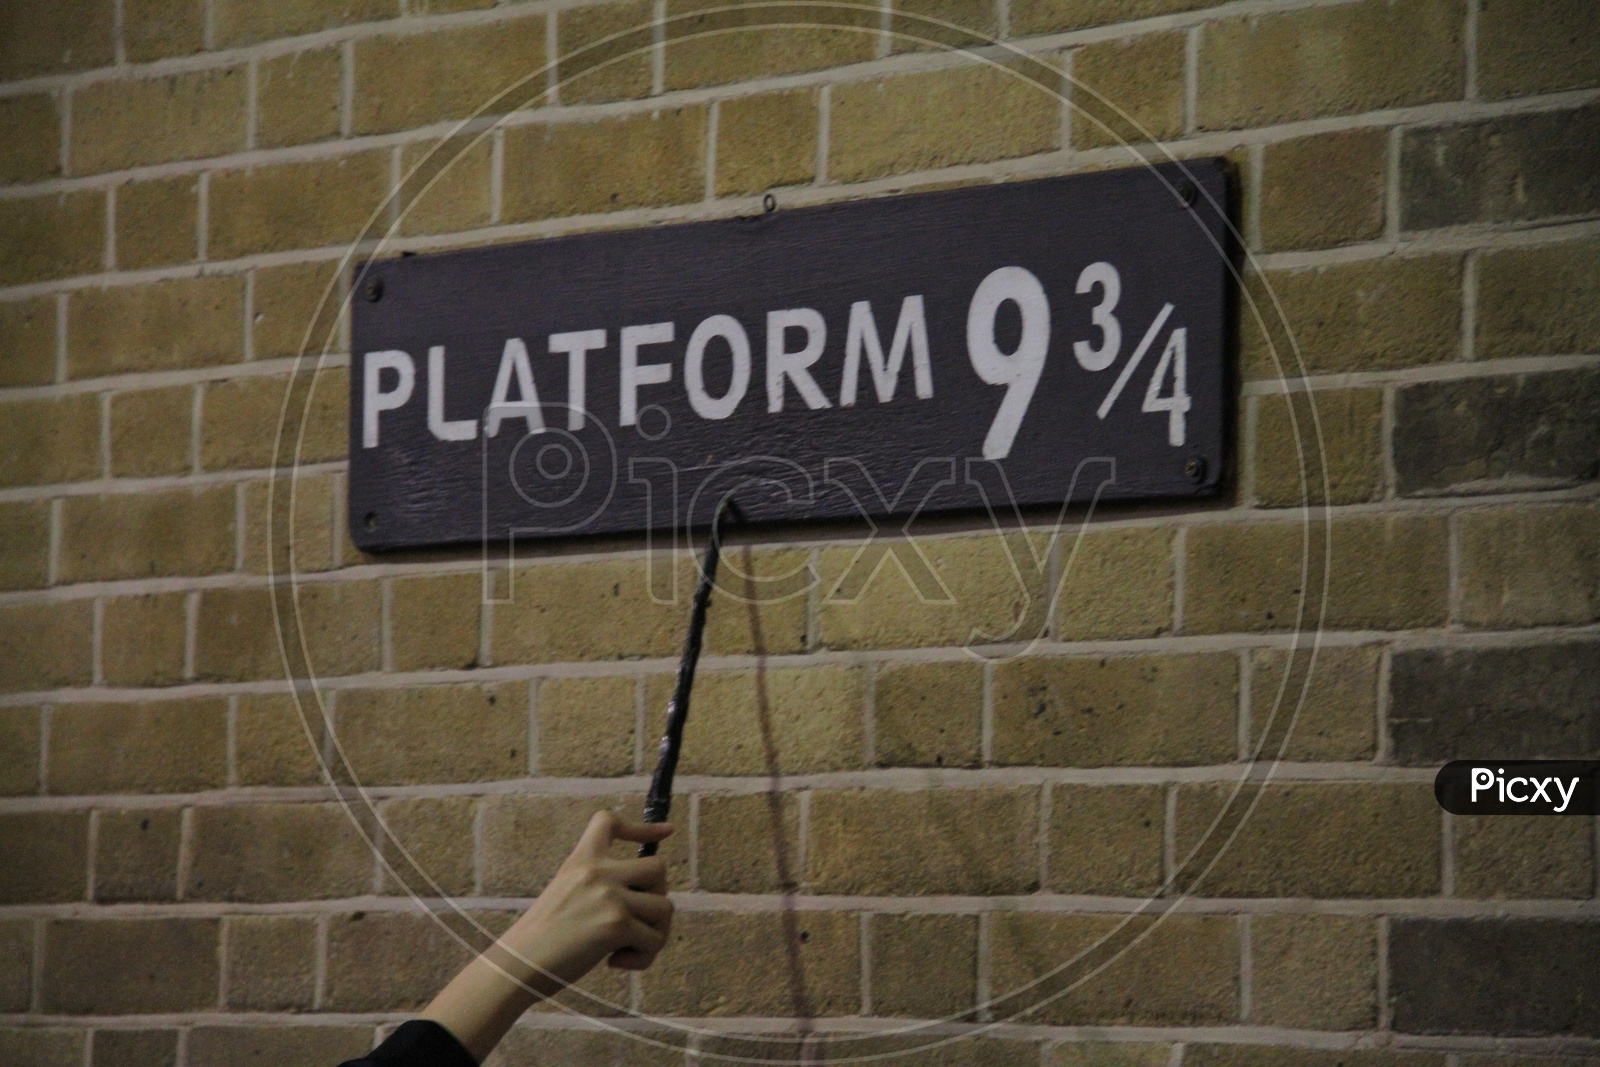 Magic Wand Pointing at Platform 9 3/4 Sign from Harry Potter movie in King's Cross Station